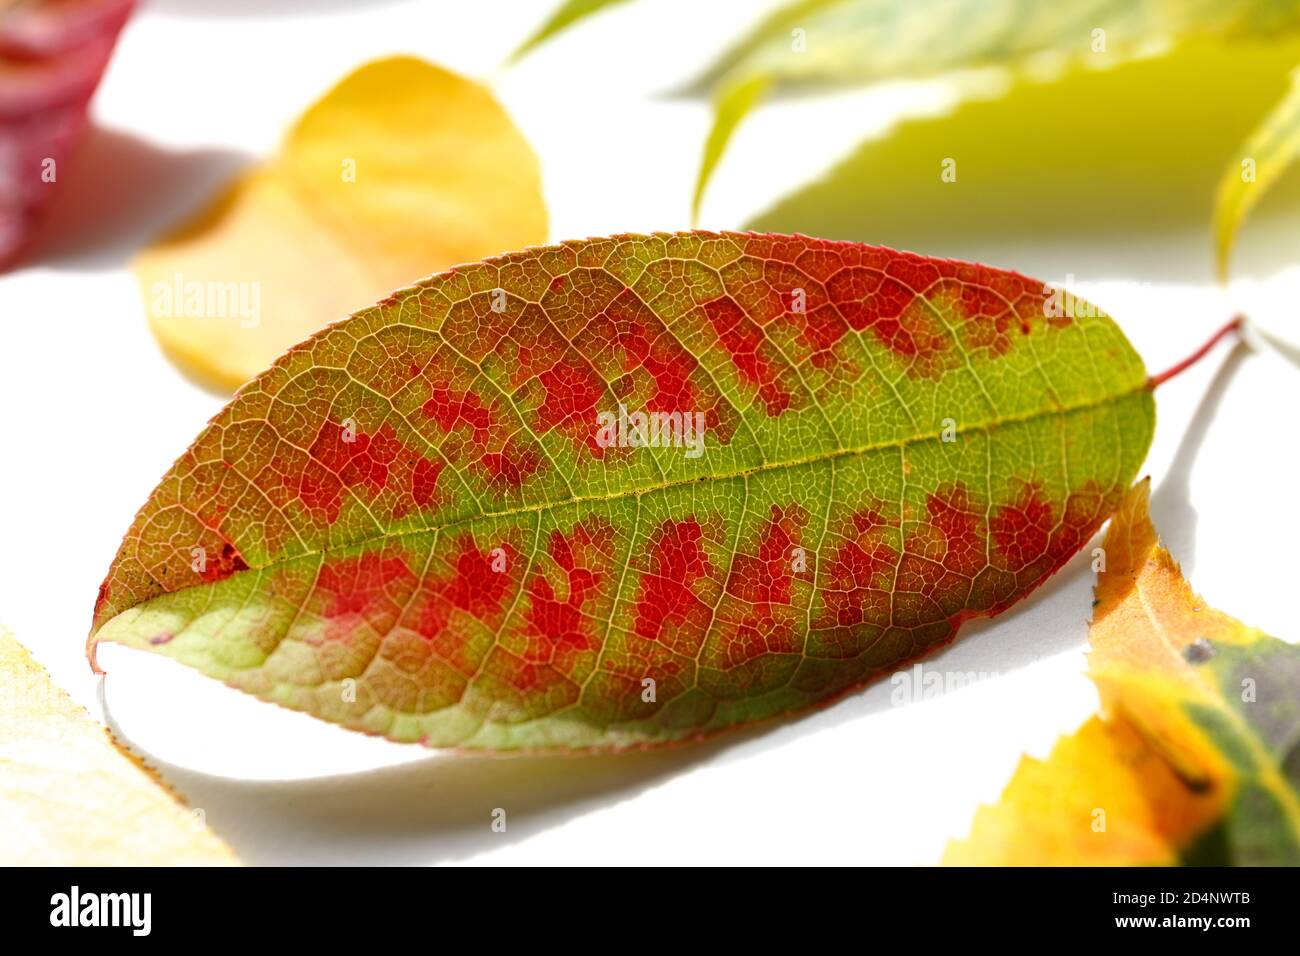 Green fallen leaves with red spots lie on a white background. Autumn brightly colored leaves close-up. Decoration in the autumn season Stock Photo